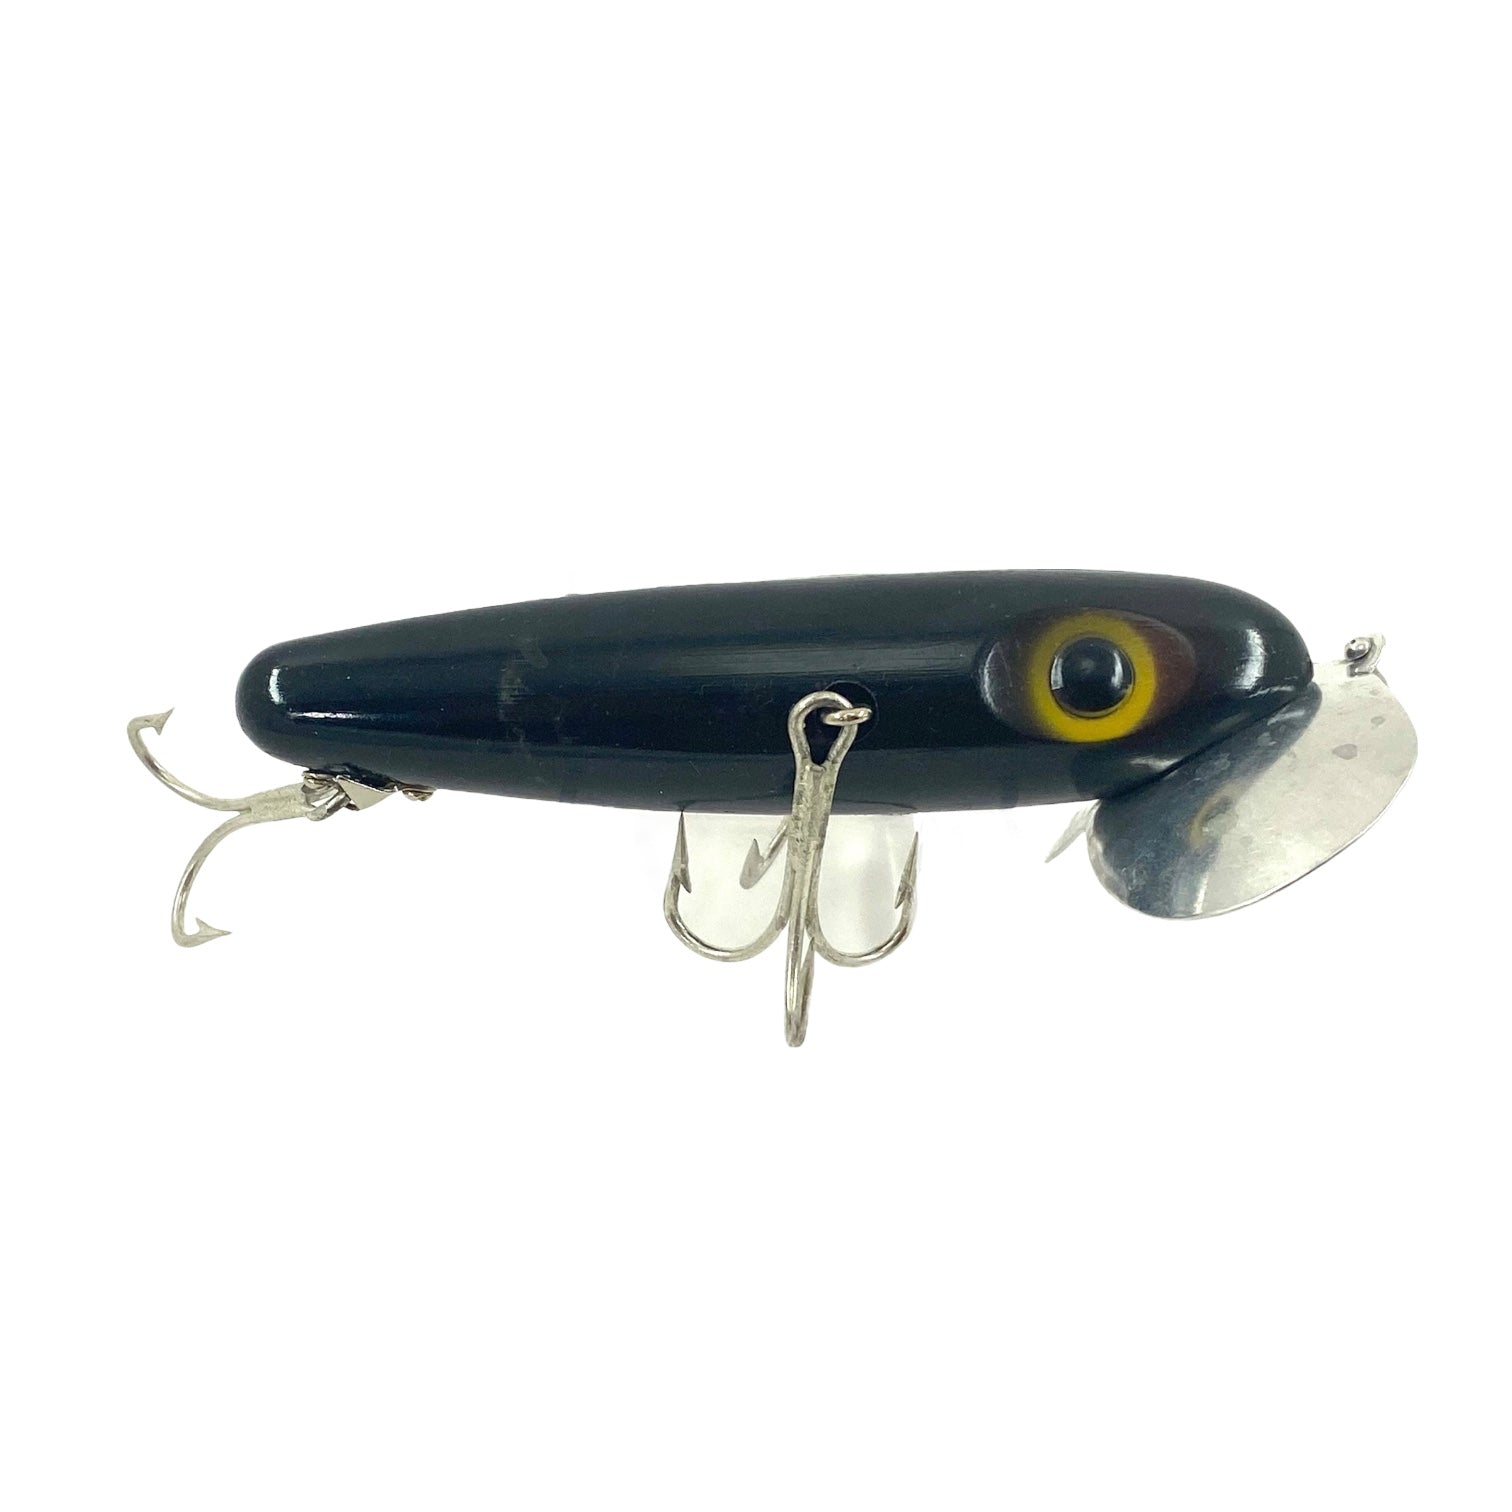 FRED ARBOGAST MUSKY SIZE JITTERBUG Fishing Lure in Original Box